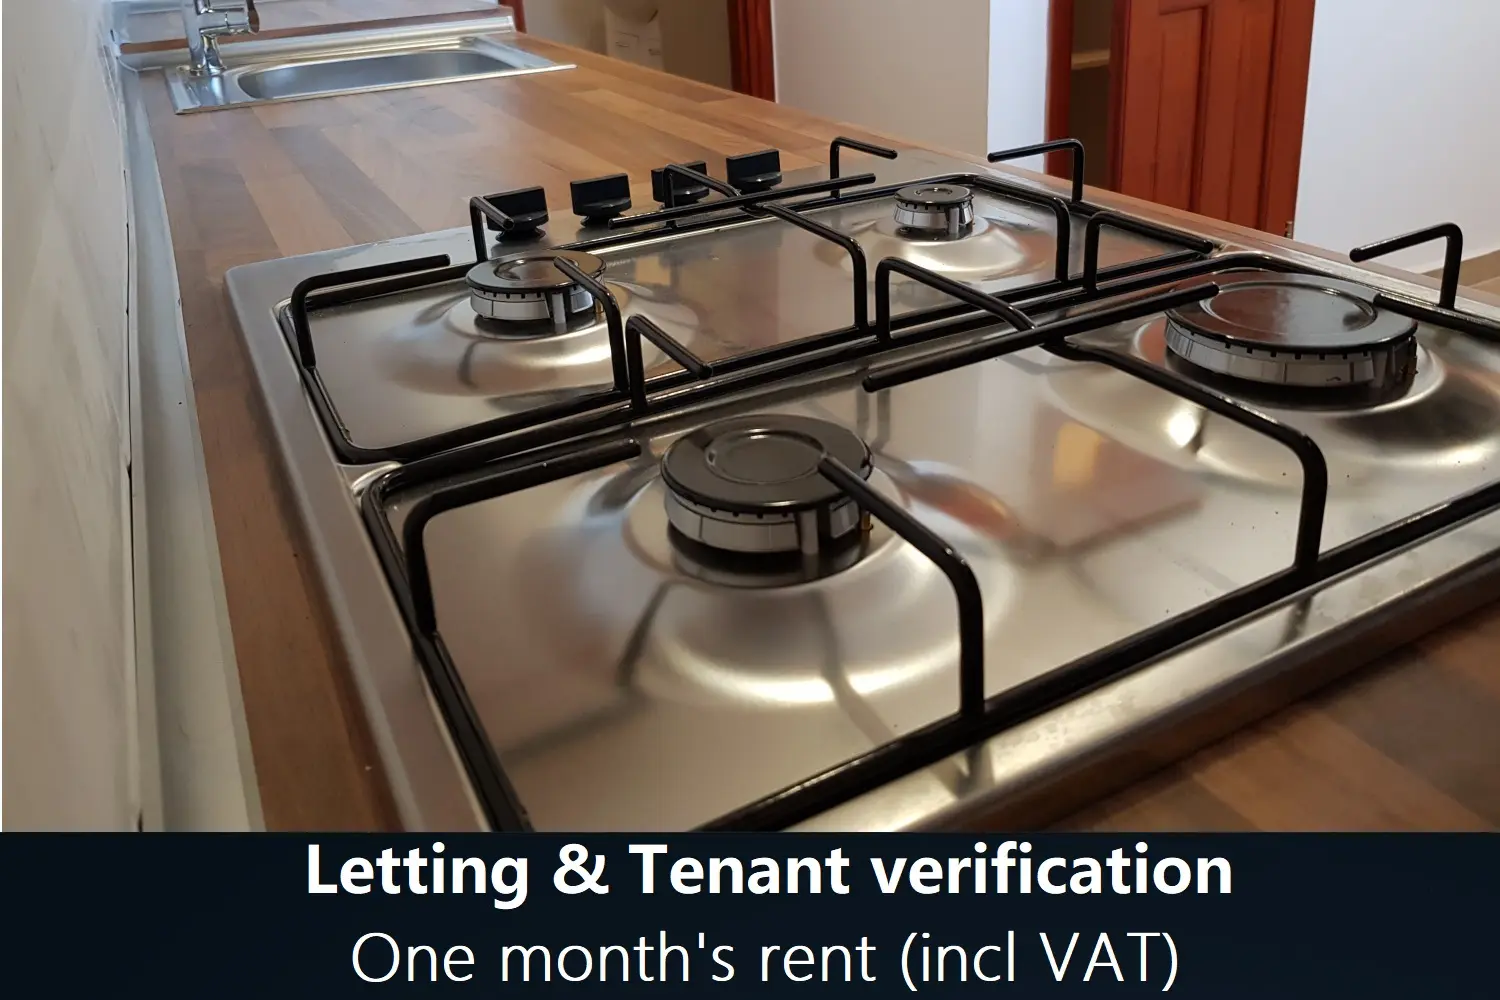 Letting and Tenant verification - One month's rent (incl VAT)